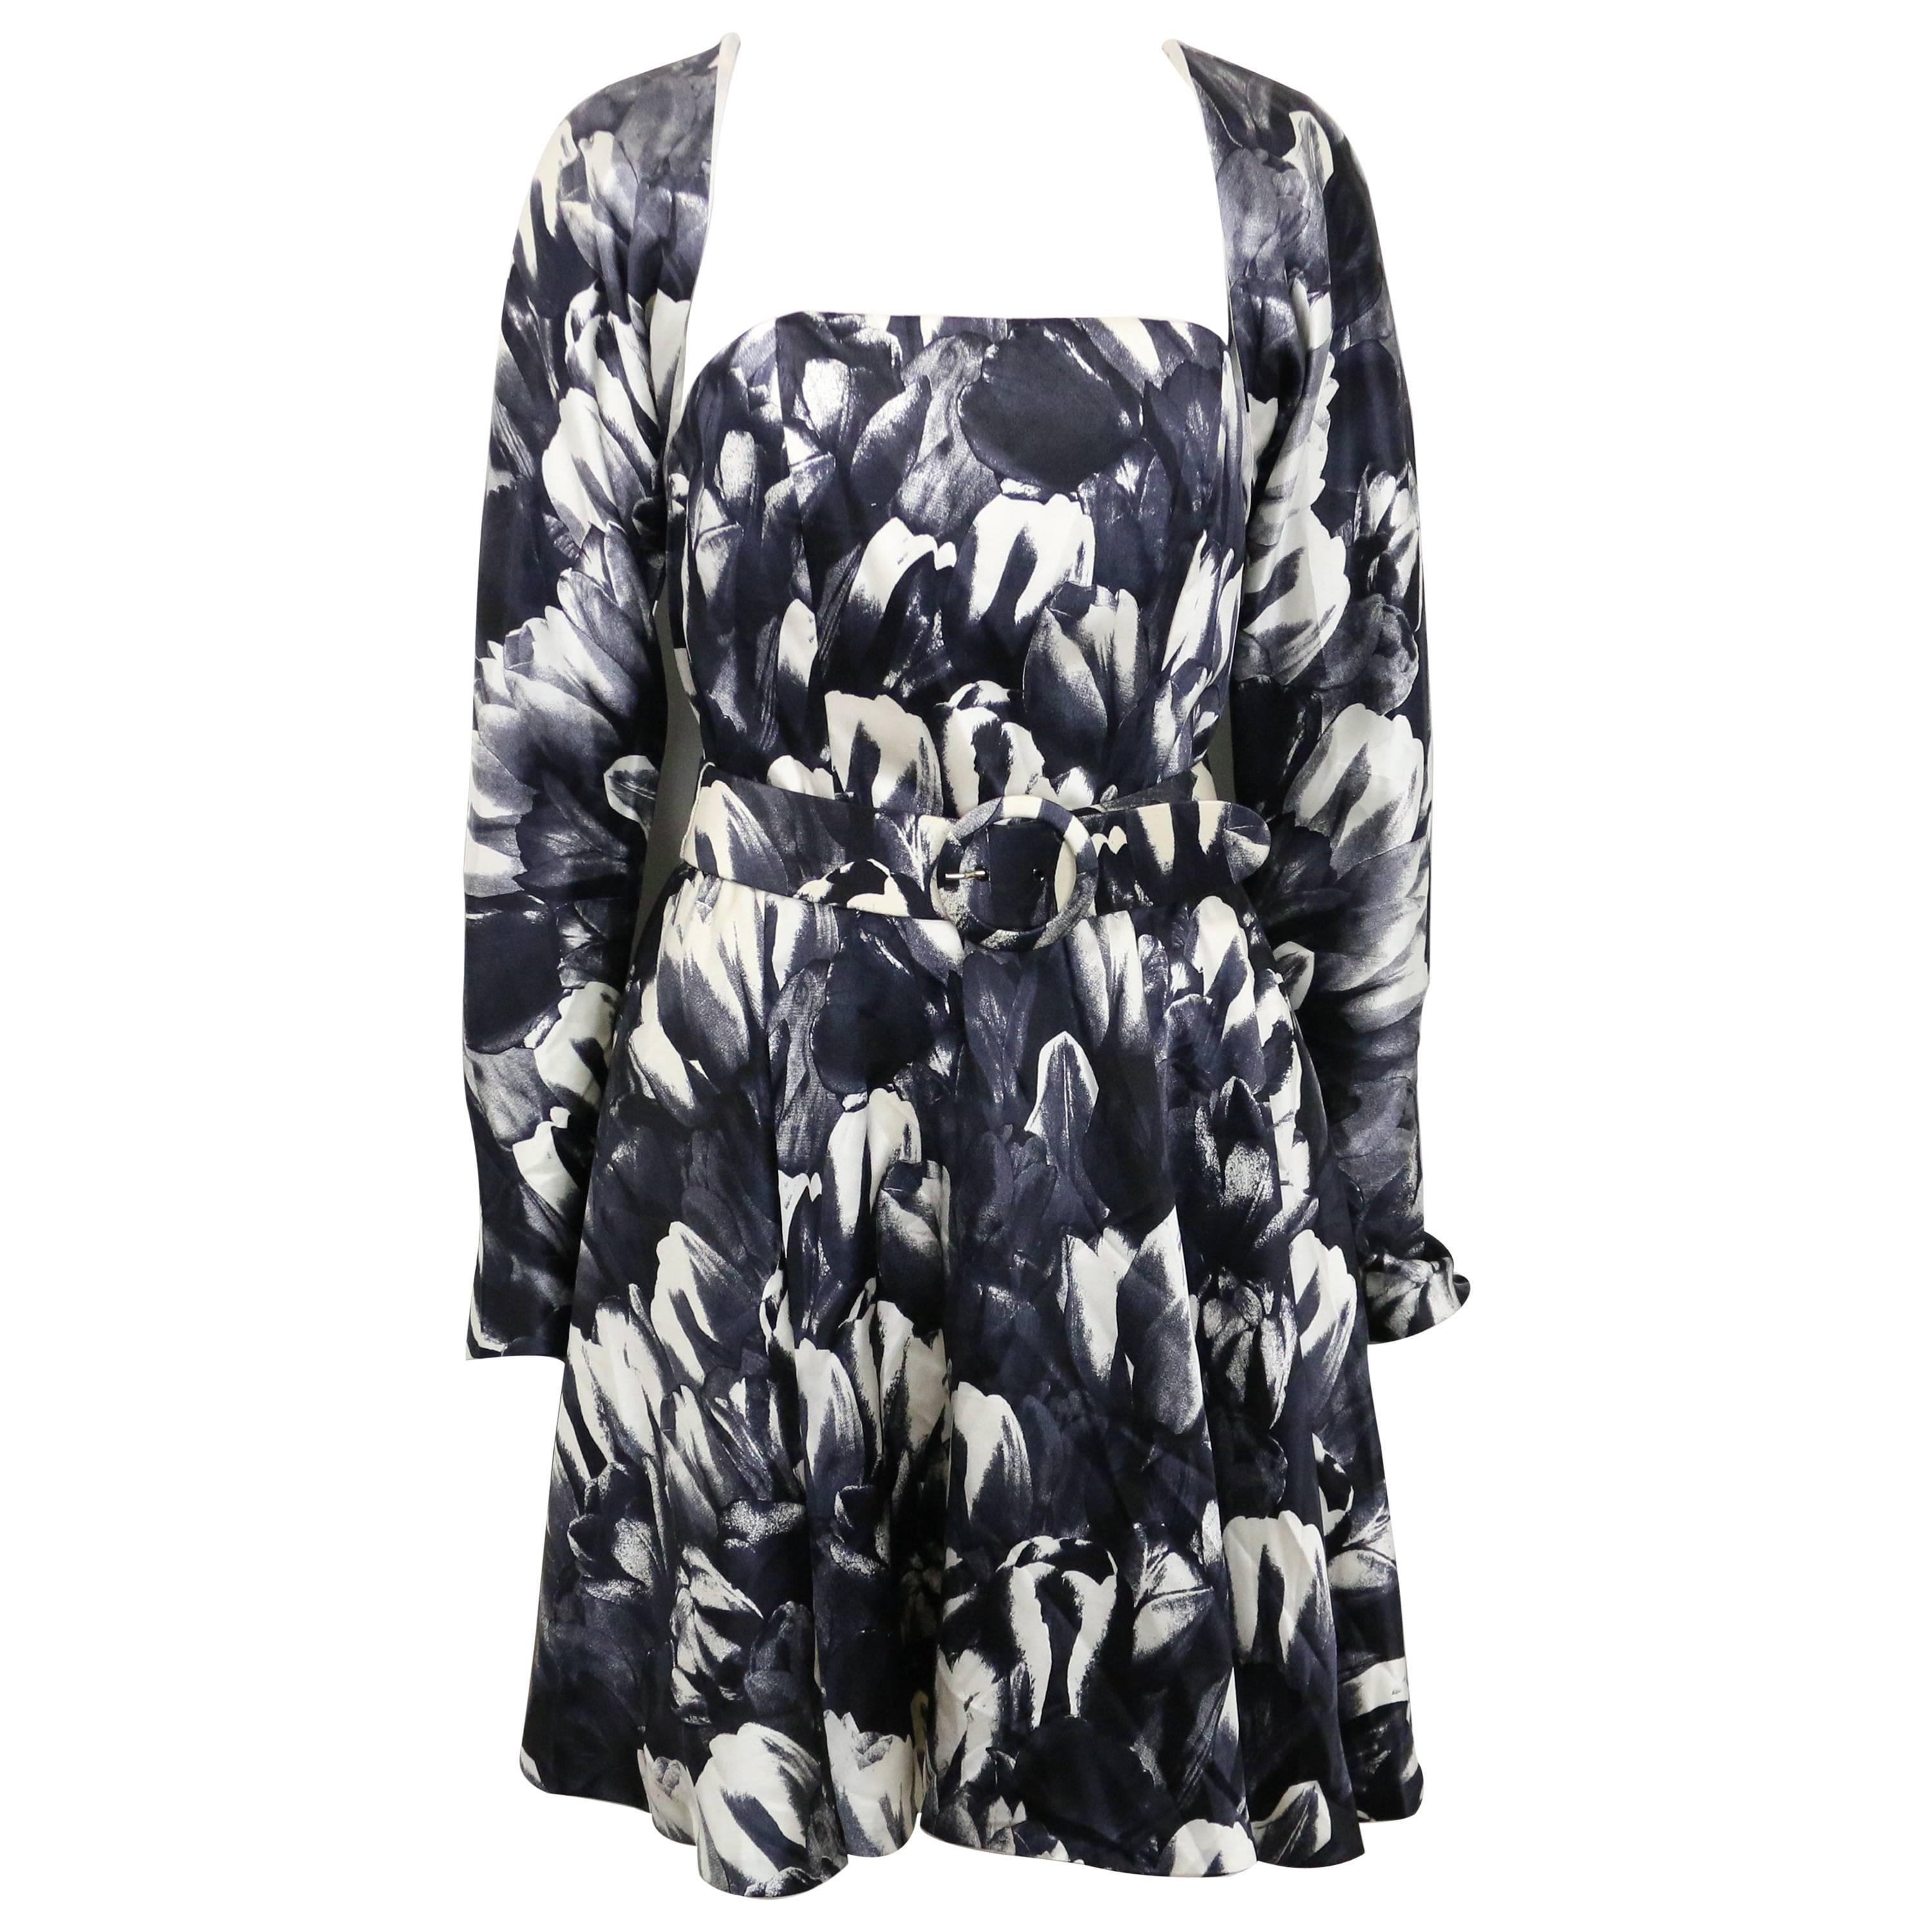 David Fielden Black and White Floral Print Tube Dress with Bolero Shrug Sleeves  For Sale